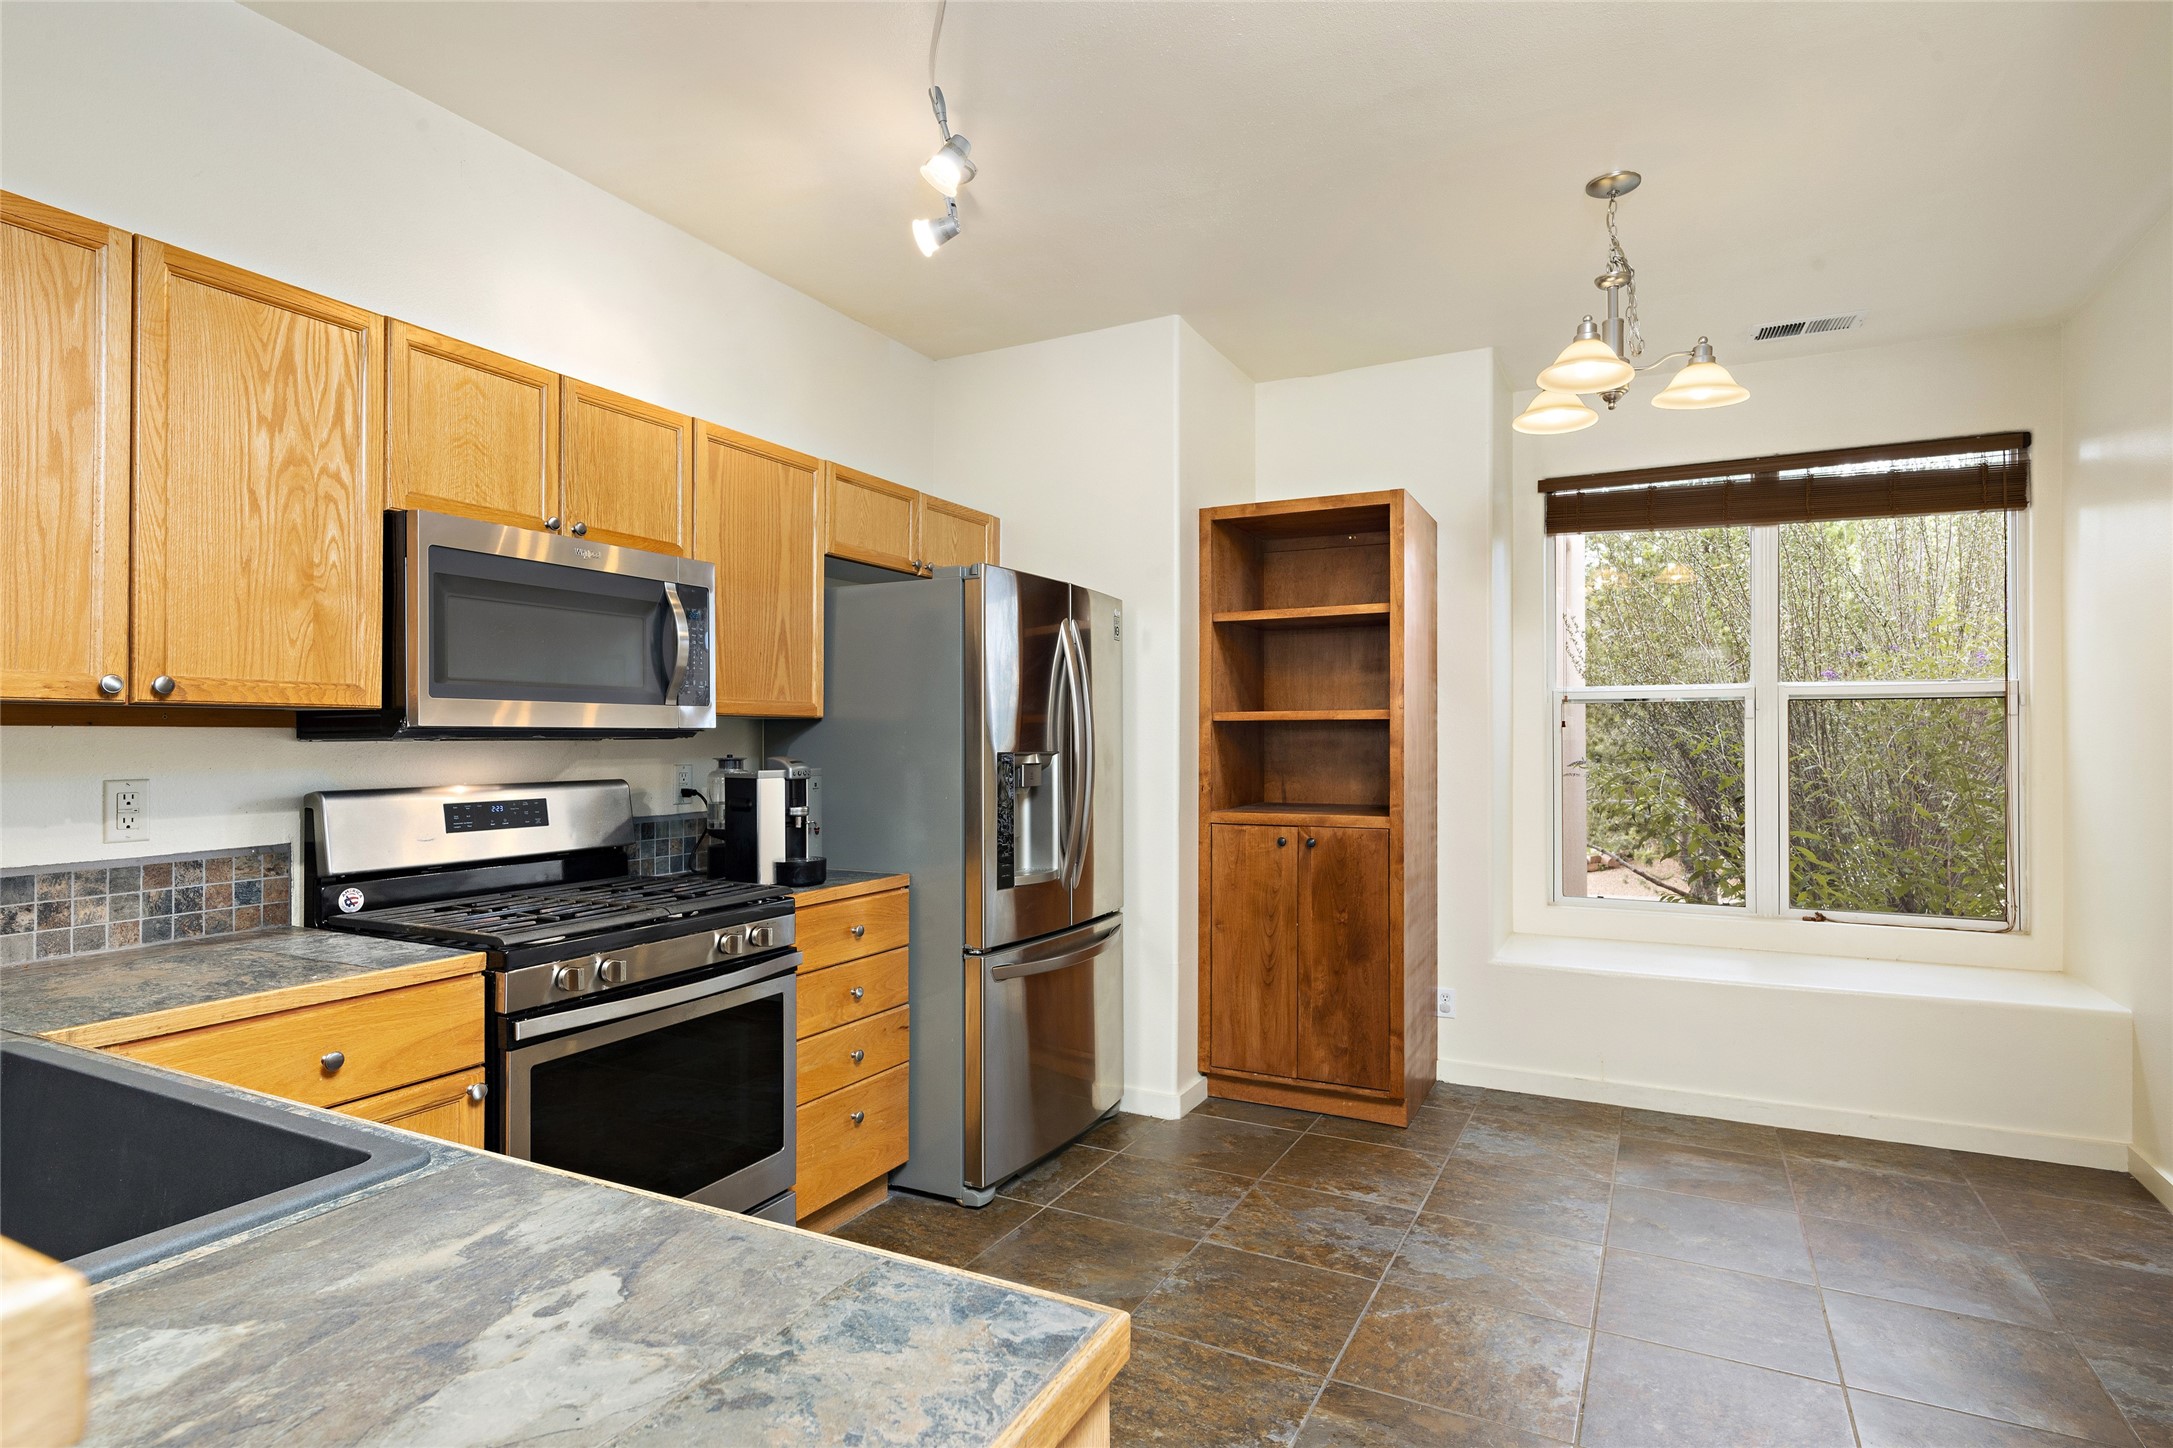 2 Autumn Light Place, Santa Fe, New Mexico 87508, 3 Bedrooms Bedrooms, ,2 BathroomsBathrooms,Residential,For Sale,2 Autumn Light Place,202232122